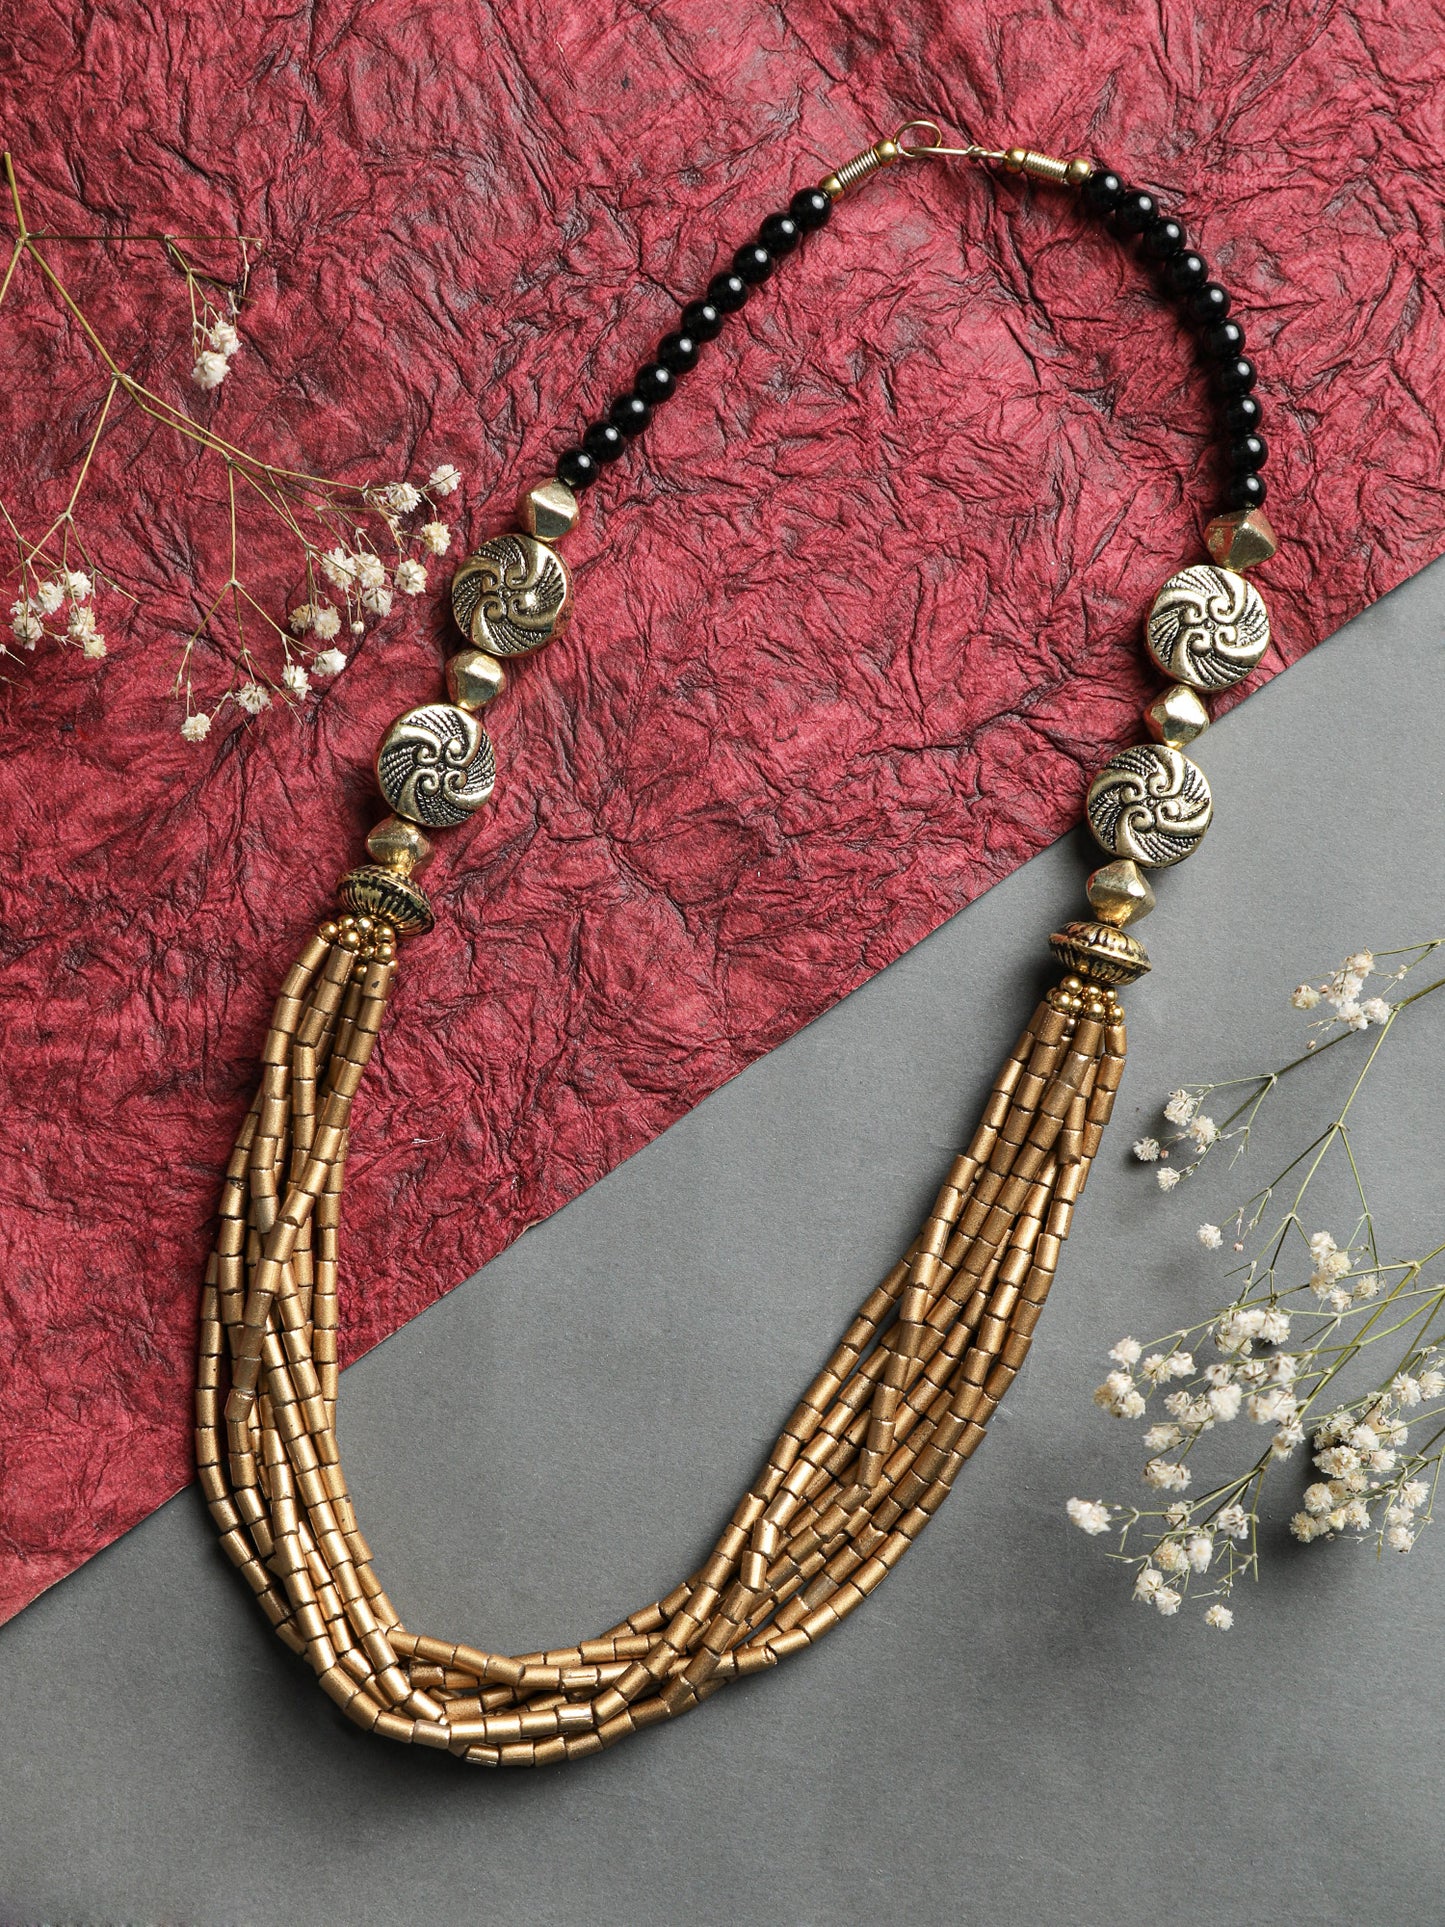 The Multi Layered Cluster Barrel Necklace in Golden